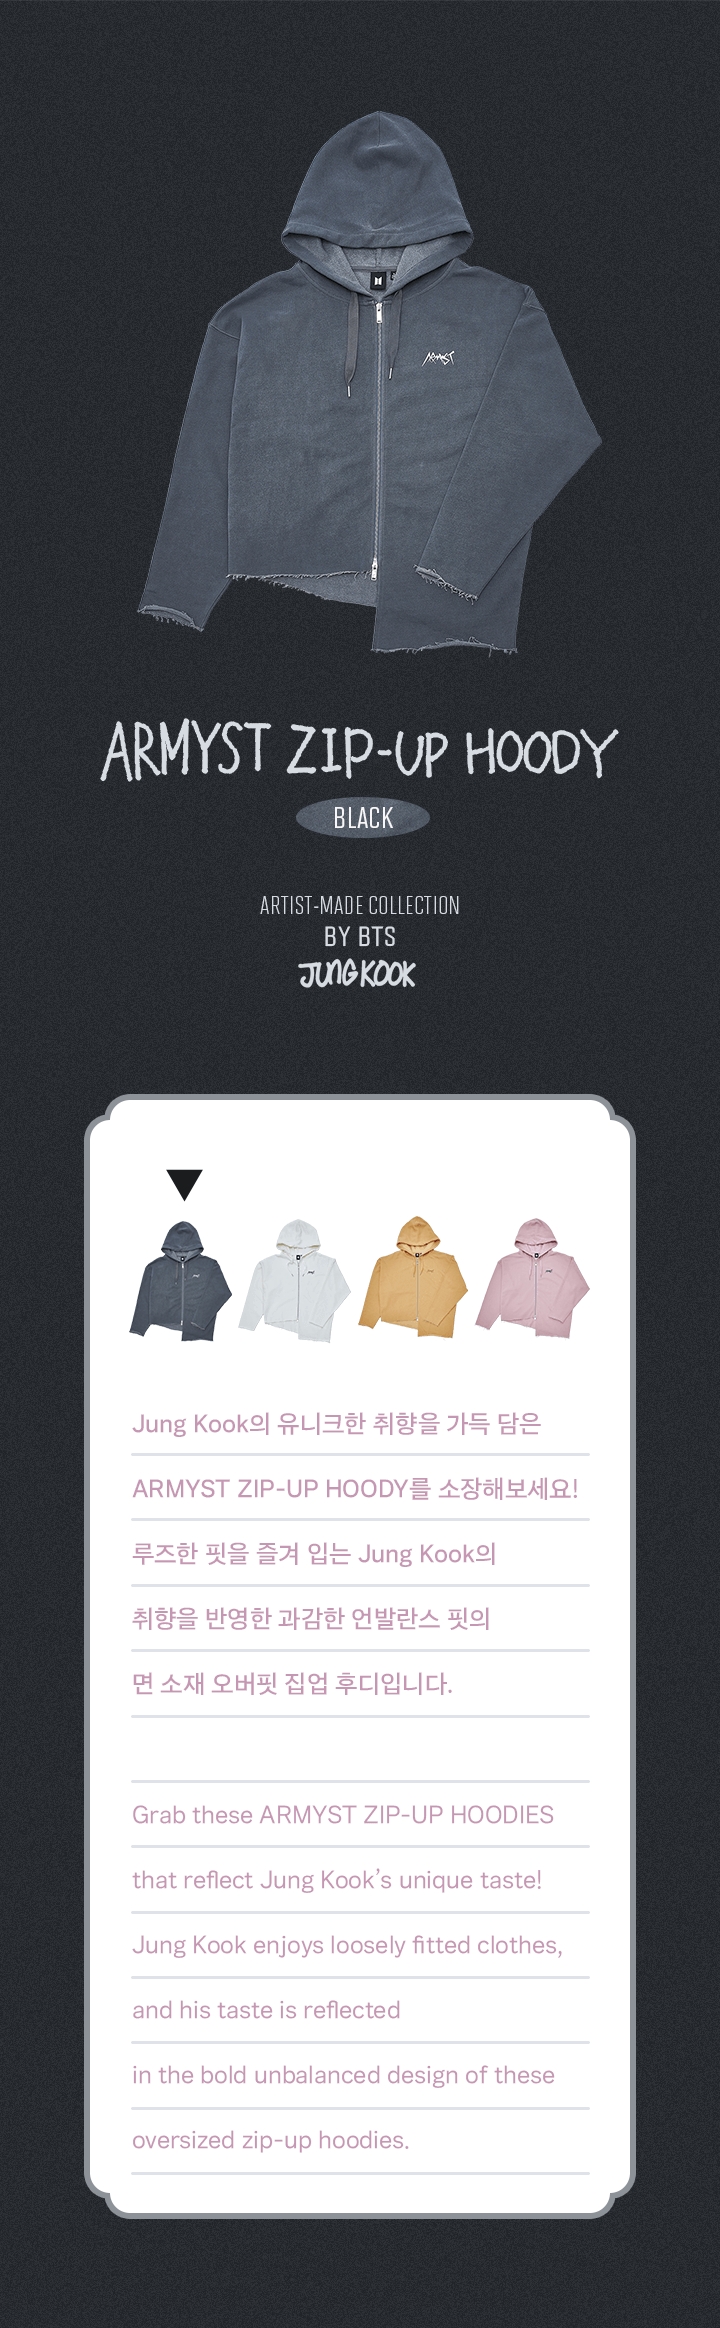 JUNG KOOK] ARMYST ZIP-UP HOODY BLACK Lの通販 by ぴろきち's shop｜ラクマ - トップス